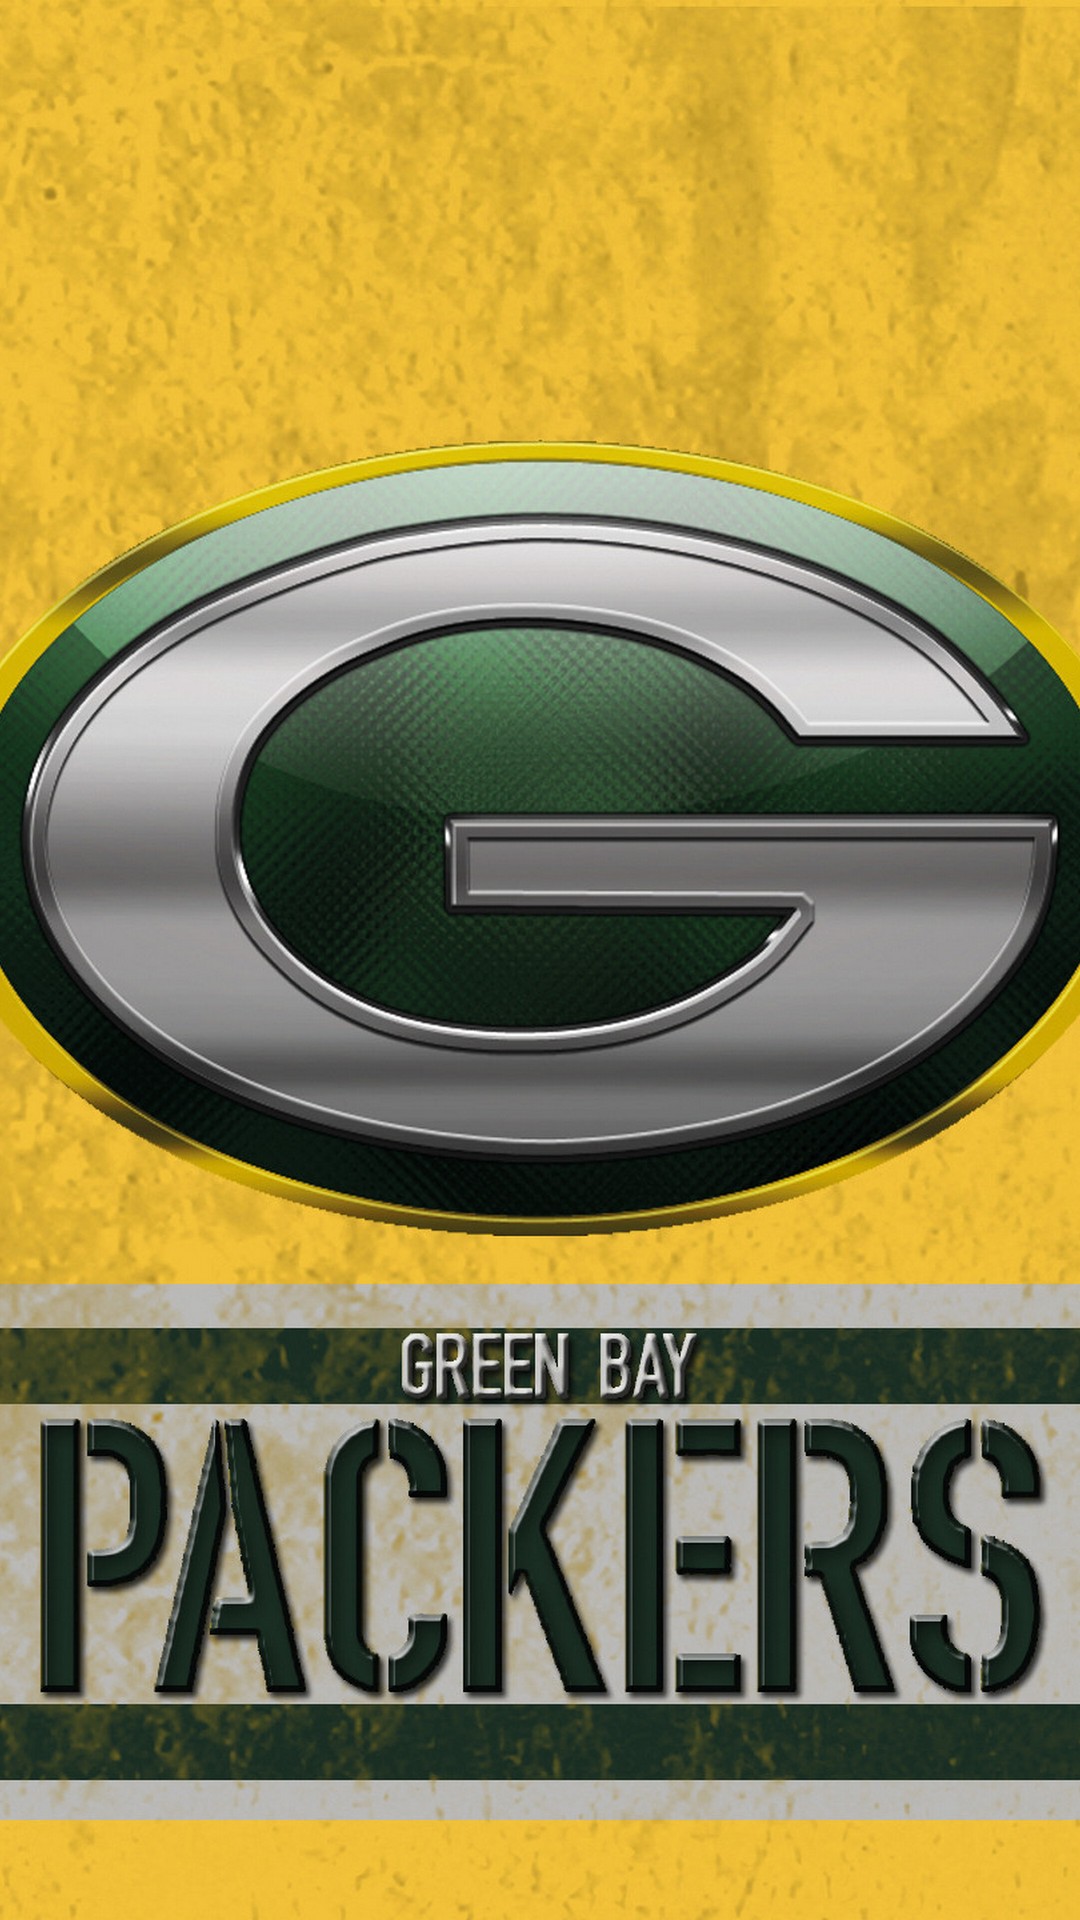 Green Bay Packers iPhone Screen Lock Wallpaper with high-resolution 1080x1920 pixel. Download and set as wallpaper for Apple iPhone X, XS Max, XR, 8, 7, 6, SE, iPad, Android